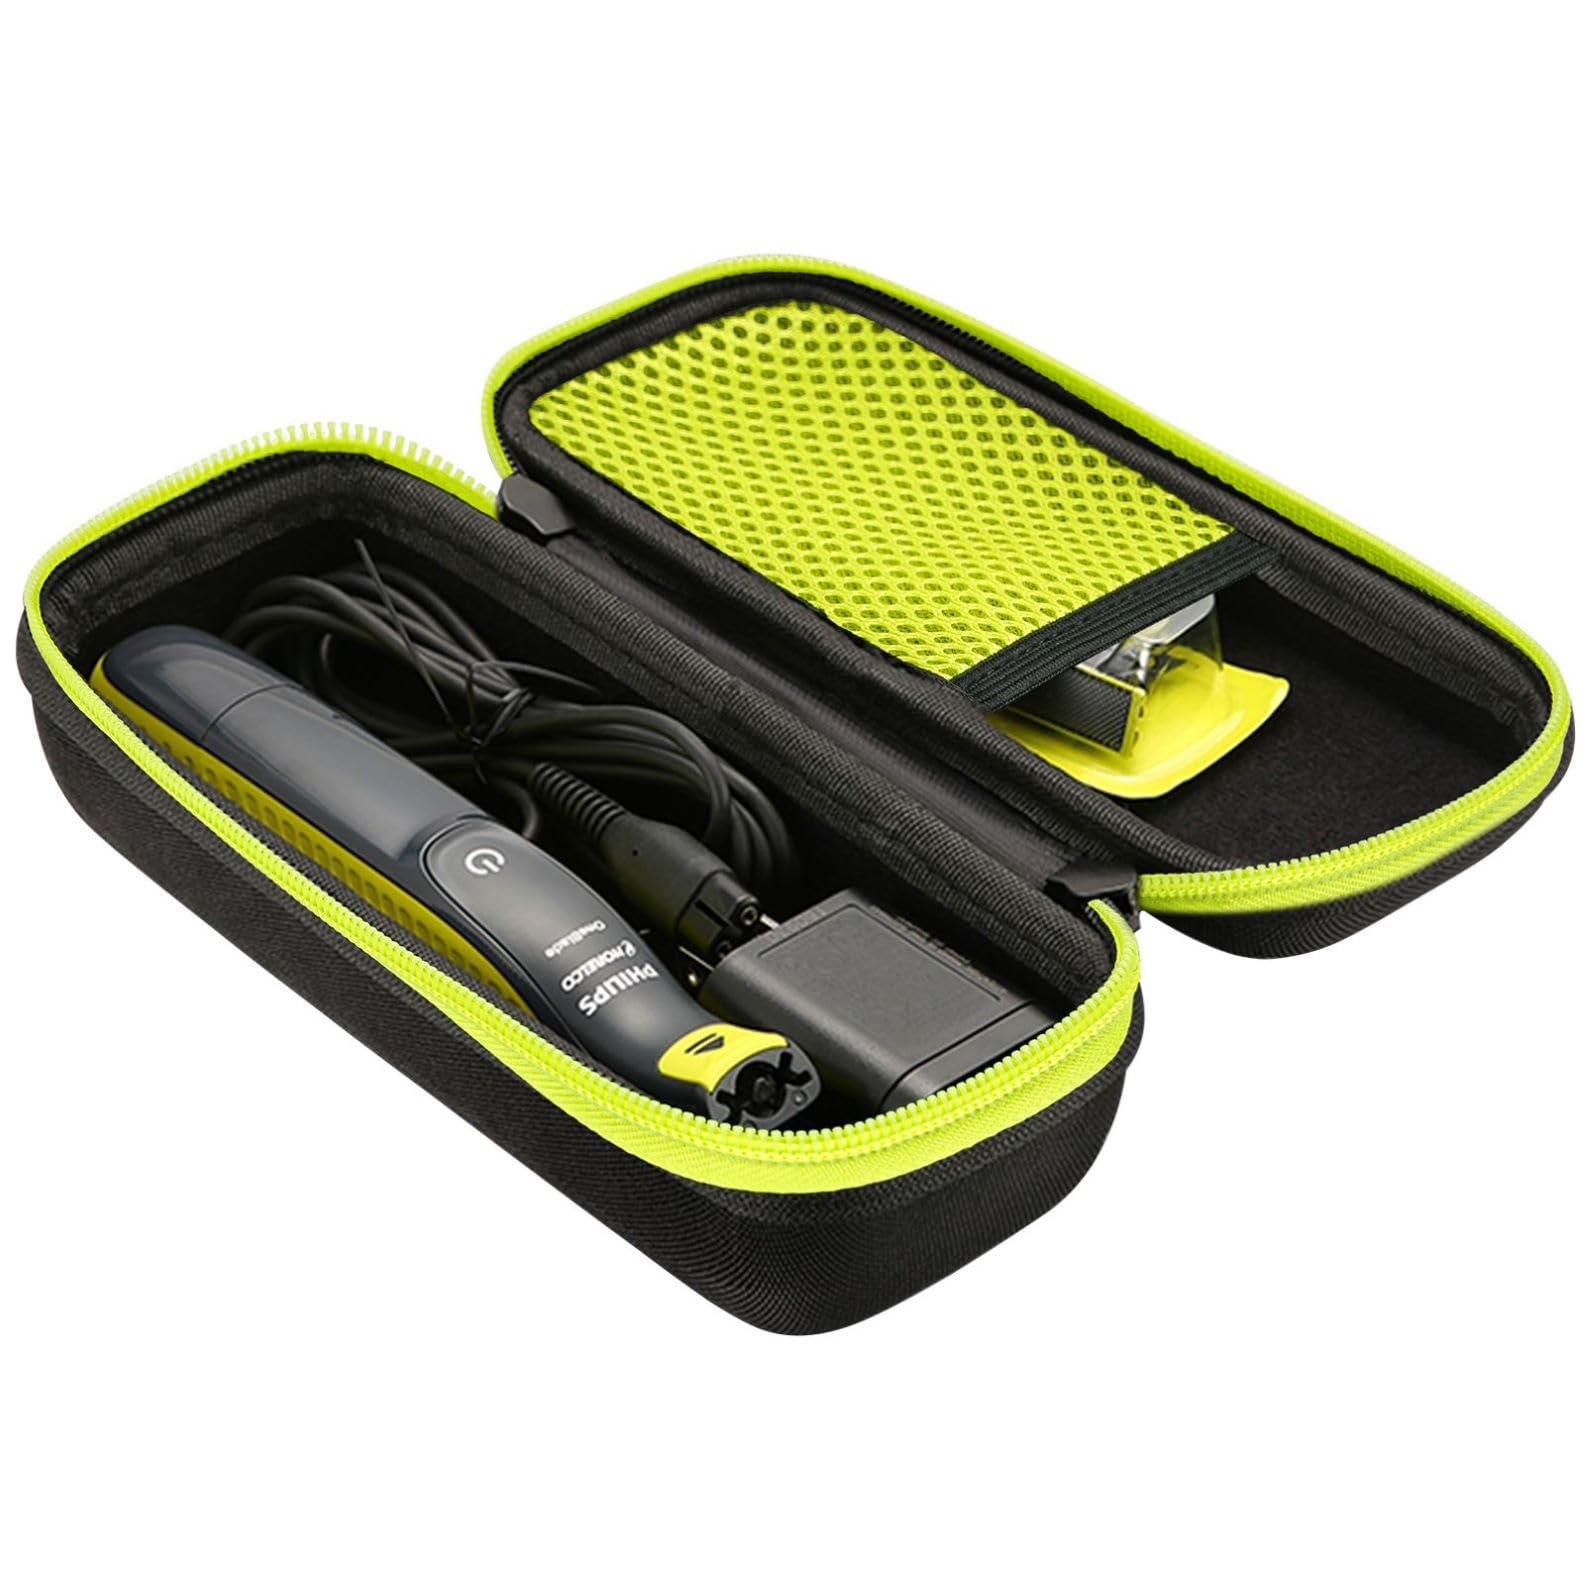 Carrying Case STO2520W